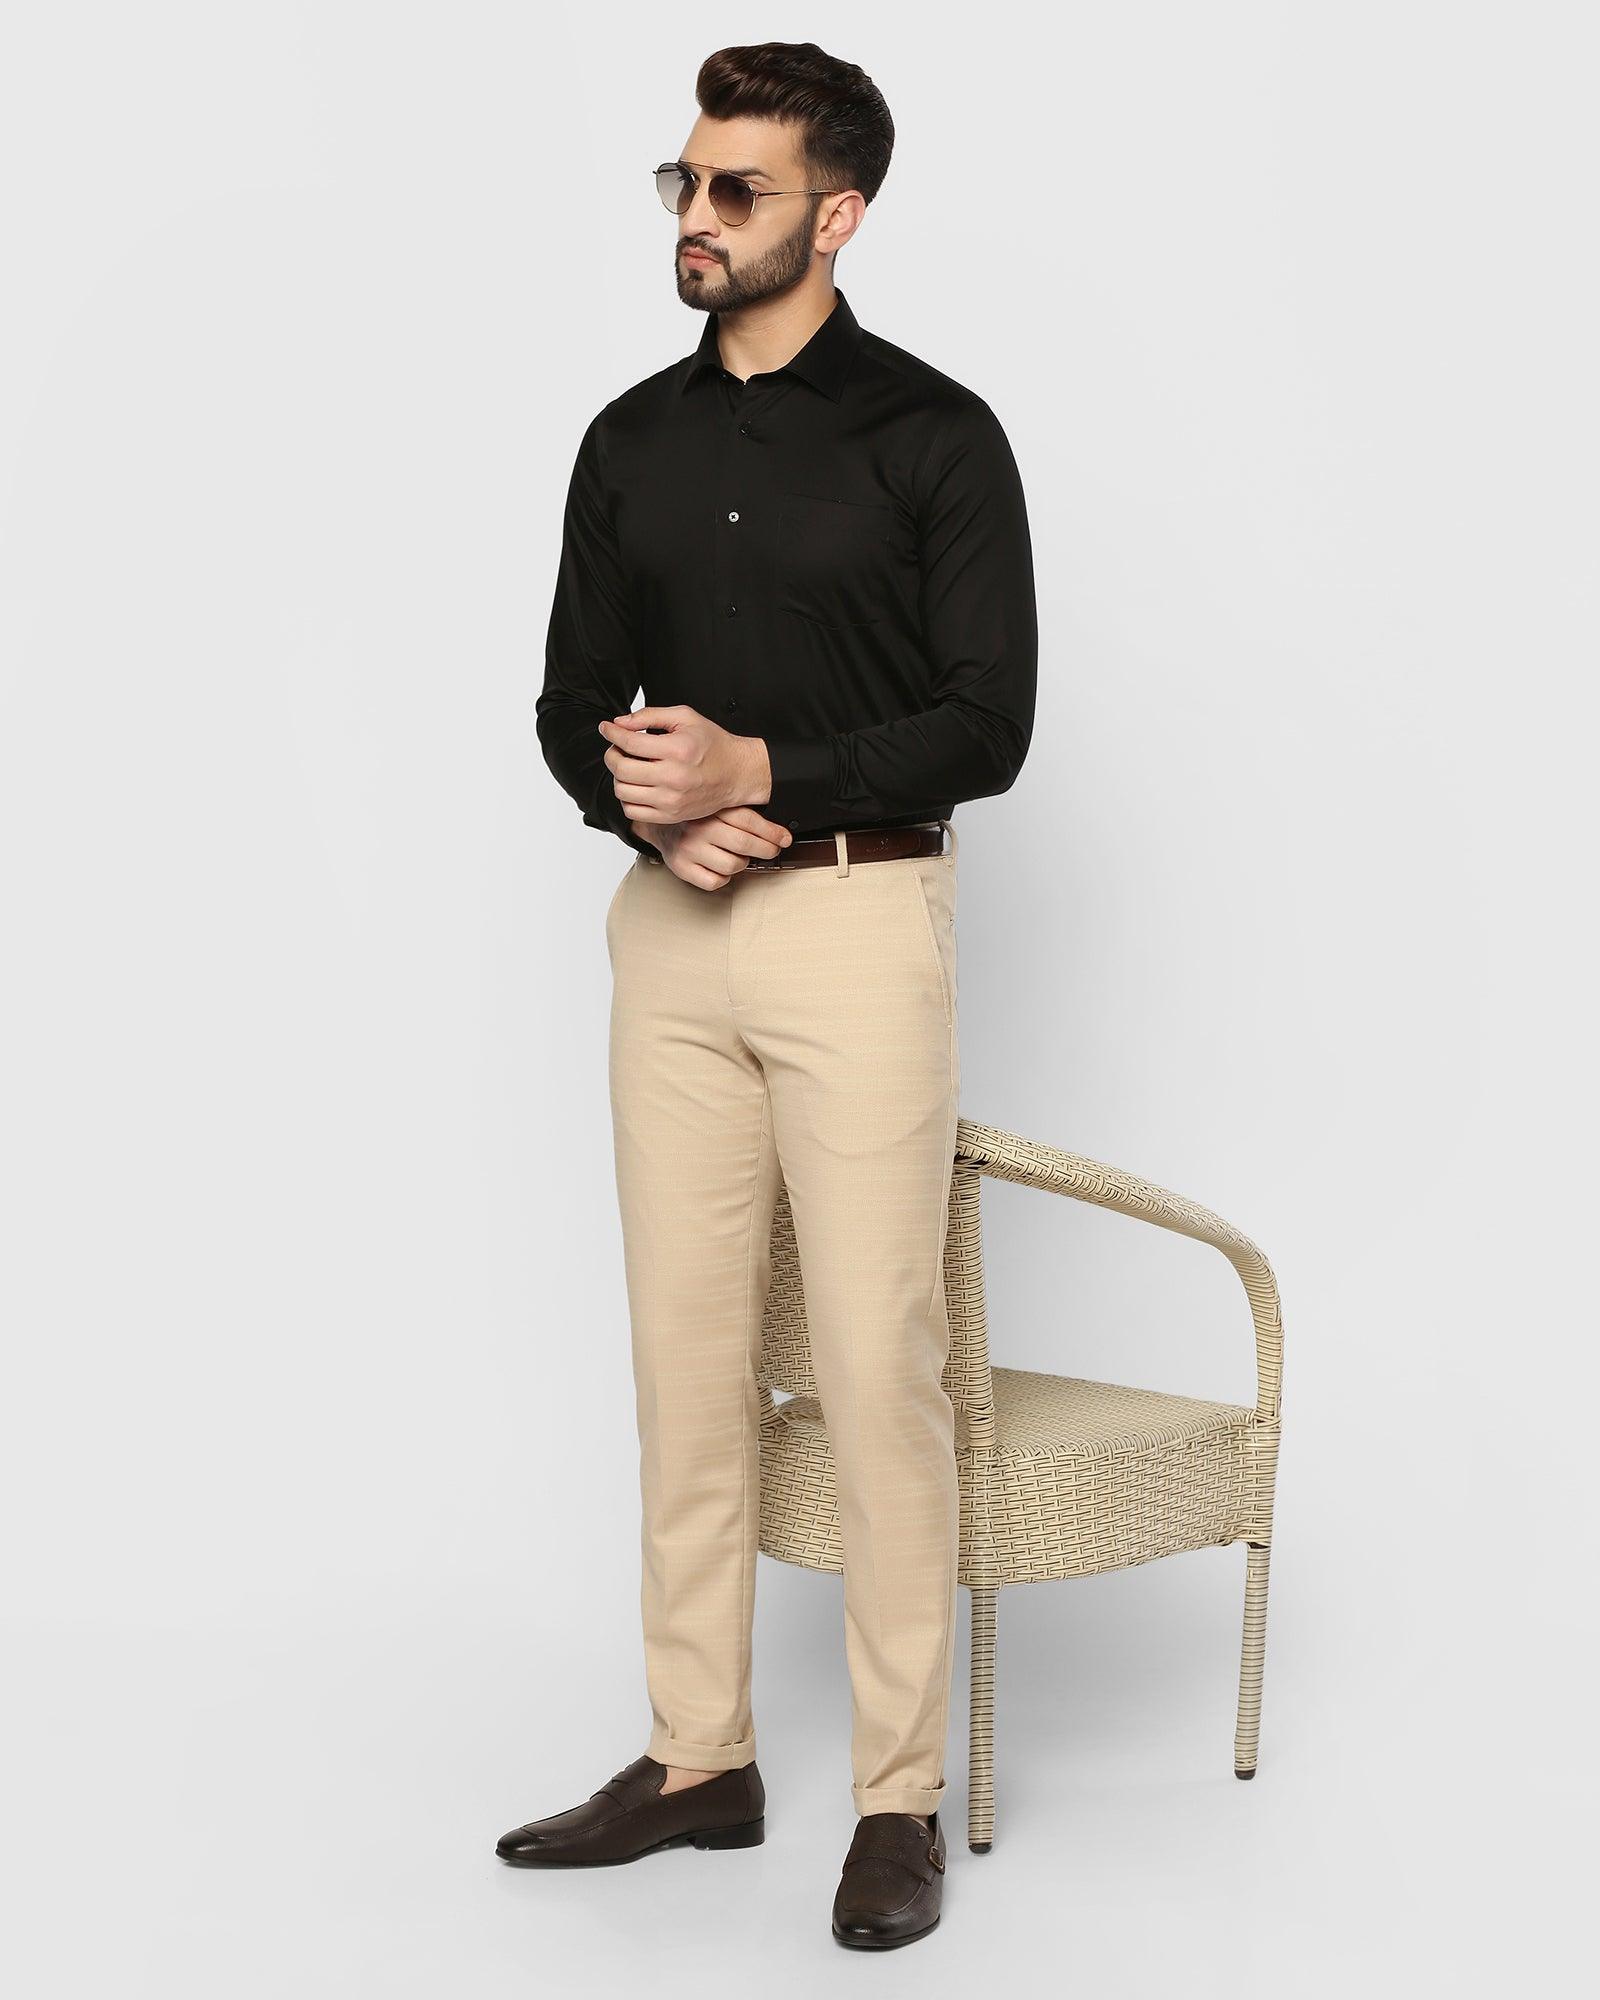 Outfit with Brown Pants | Brown Slacks Outfit | SAINLY